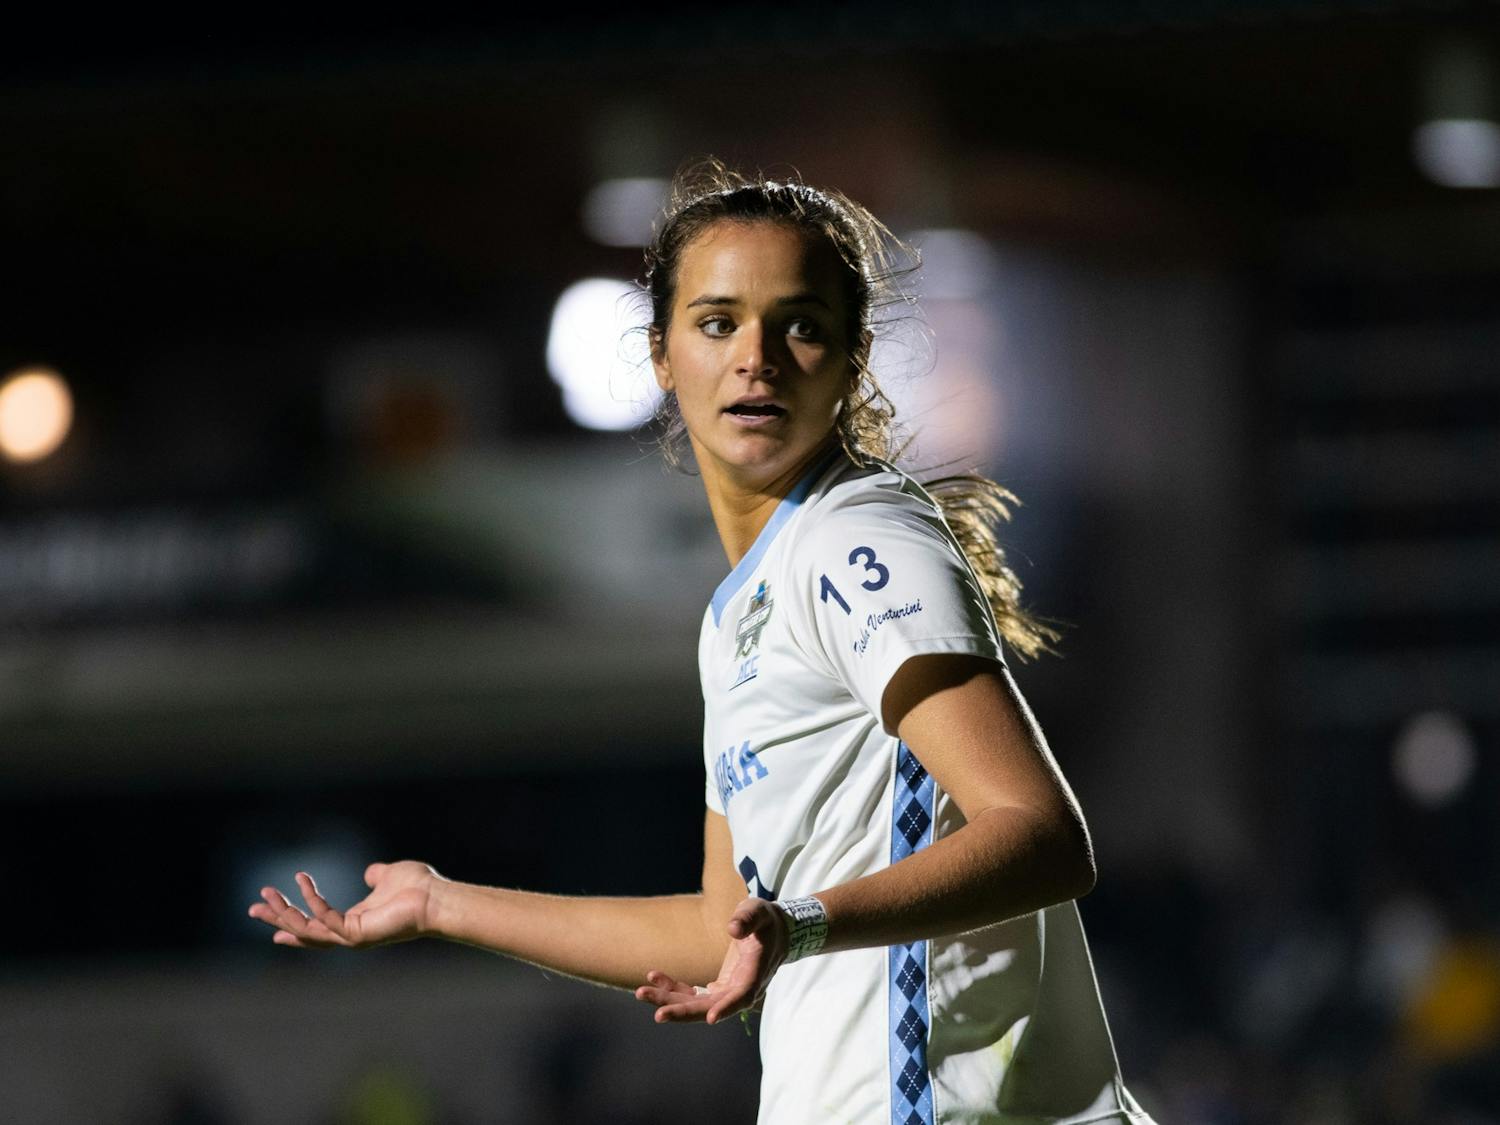 UNC senior forward Isabel Cox (13) questions a call during UNC's game against UCLA in the NCAA Finals at WakeMed Soccer Park on Friday, Dec. 5, 2022. UNC lost 3-2 in 2OT.